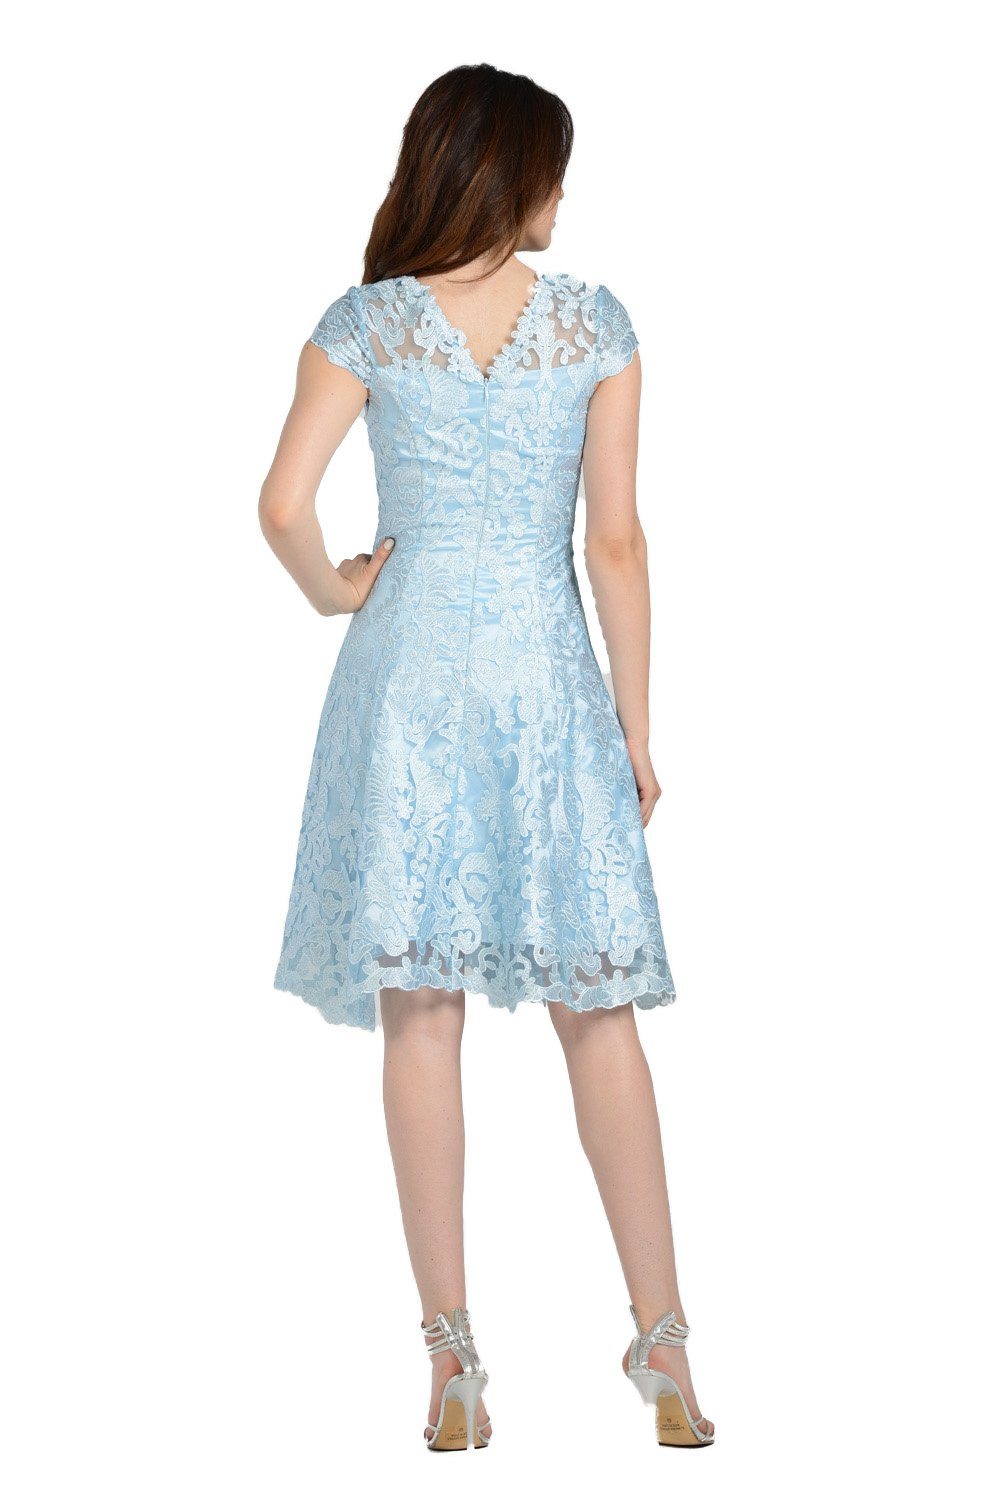 Short Knee Length Lace Dress with Short Sleeves by Poly USA 8090-Short Cocktail Dresses-ABC Fashion